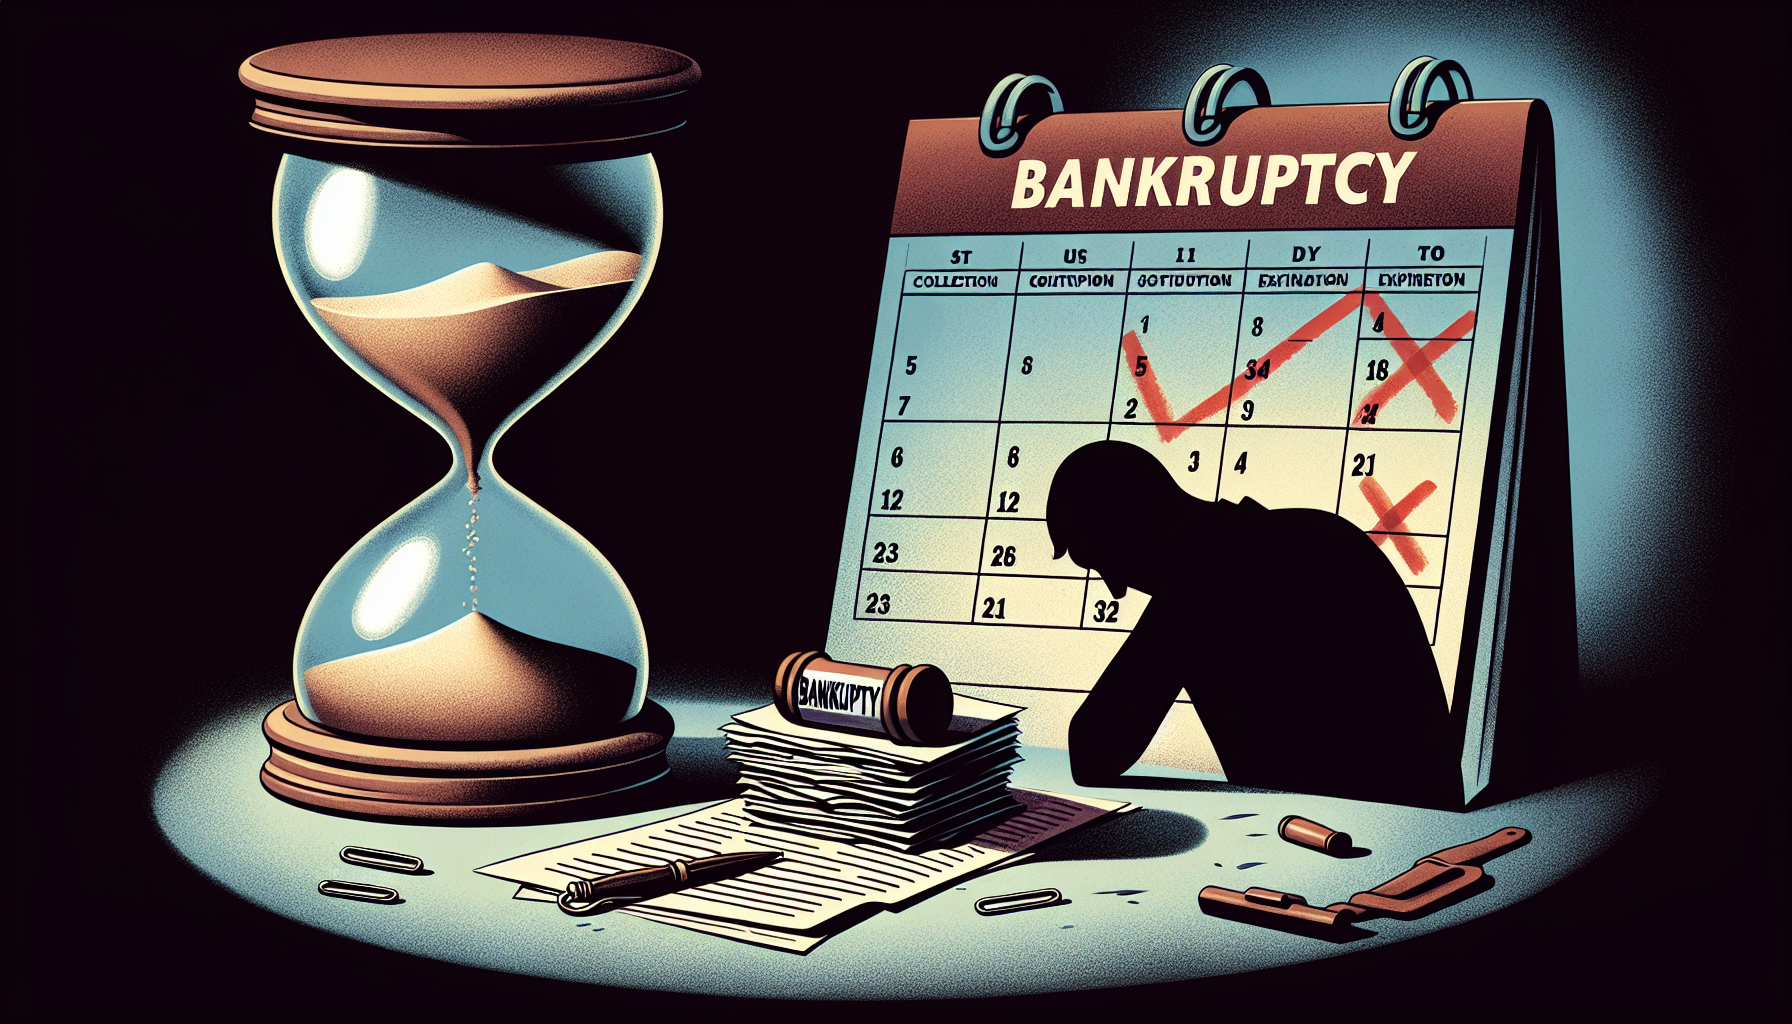 Illustration of a person filing for bankruptcy